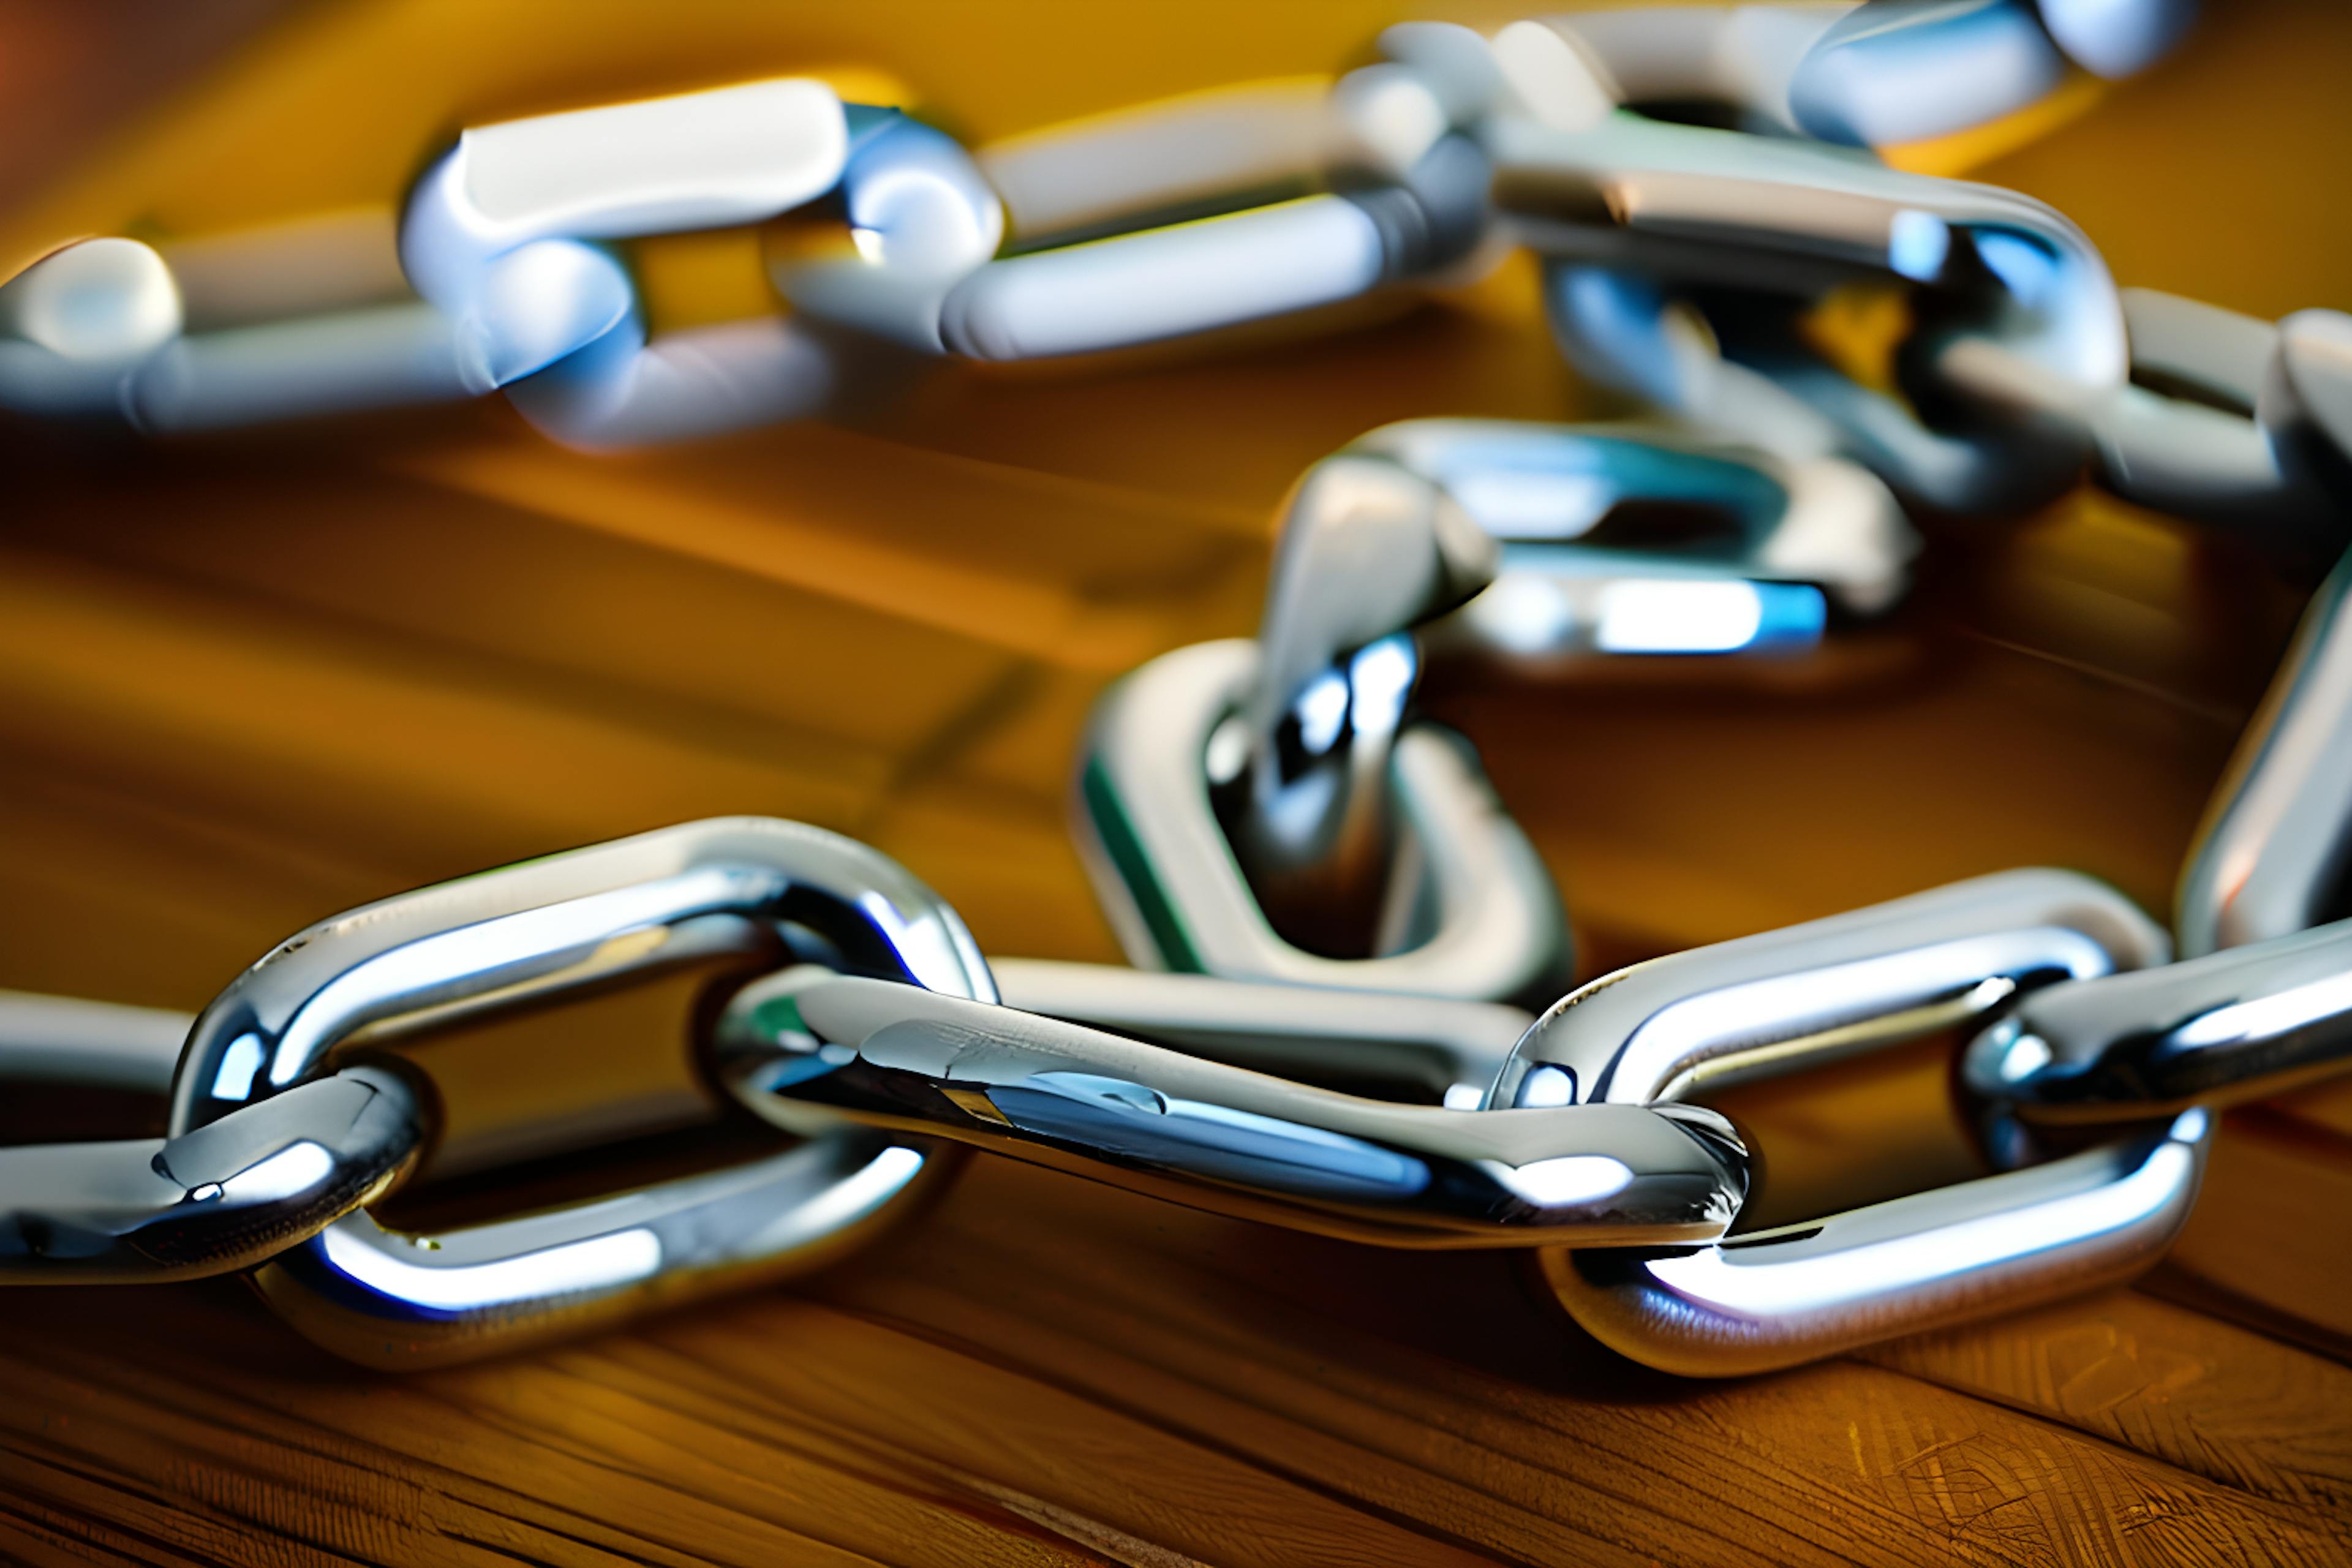 featured image - Sellers in Chains: Amazon's Unyielding Approach to Fulfilment Services 